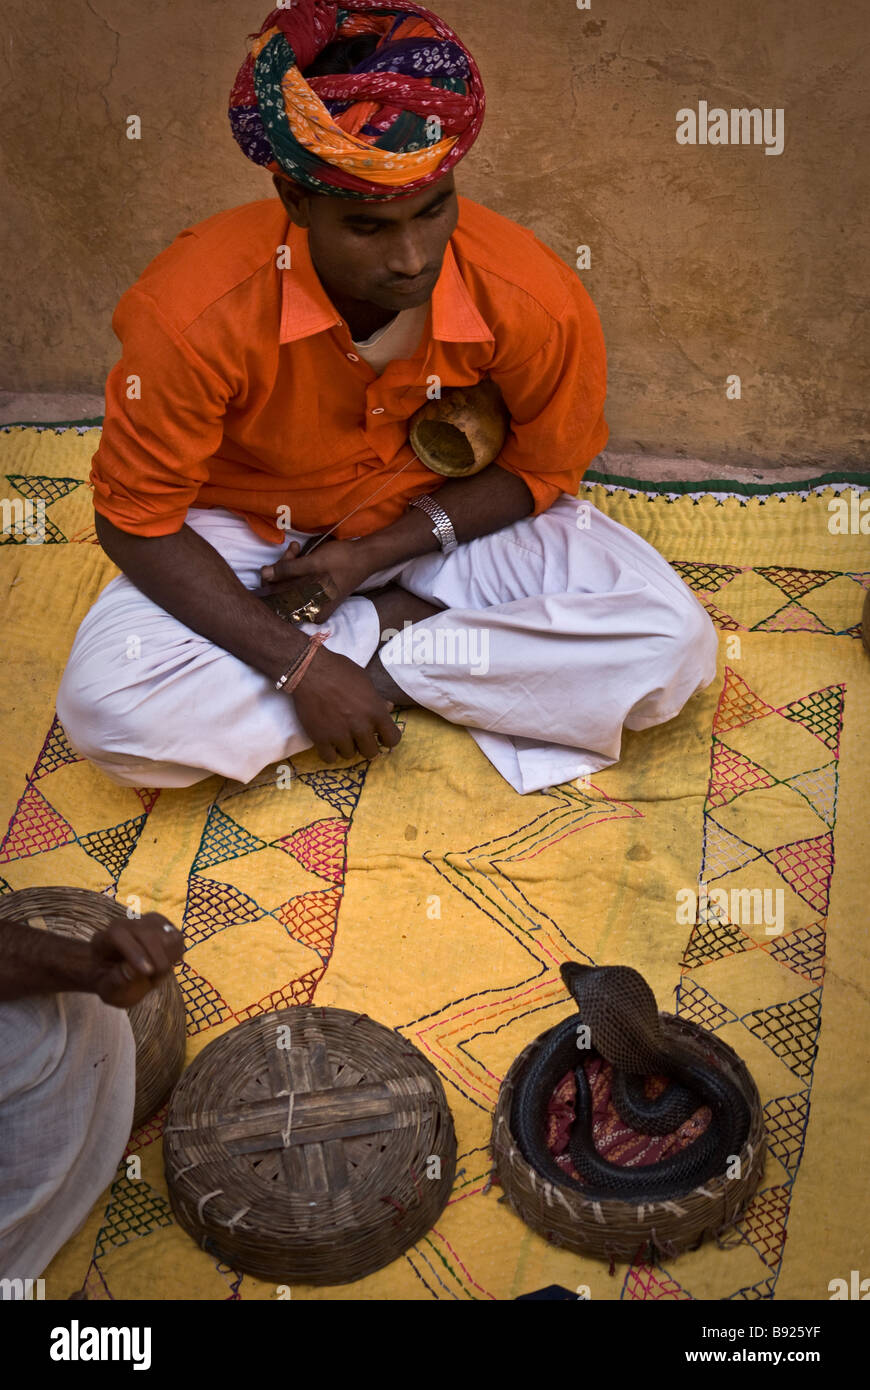 A snake charmer performing in front of interested tourists. India. Stock Photo